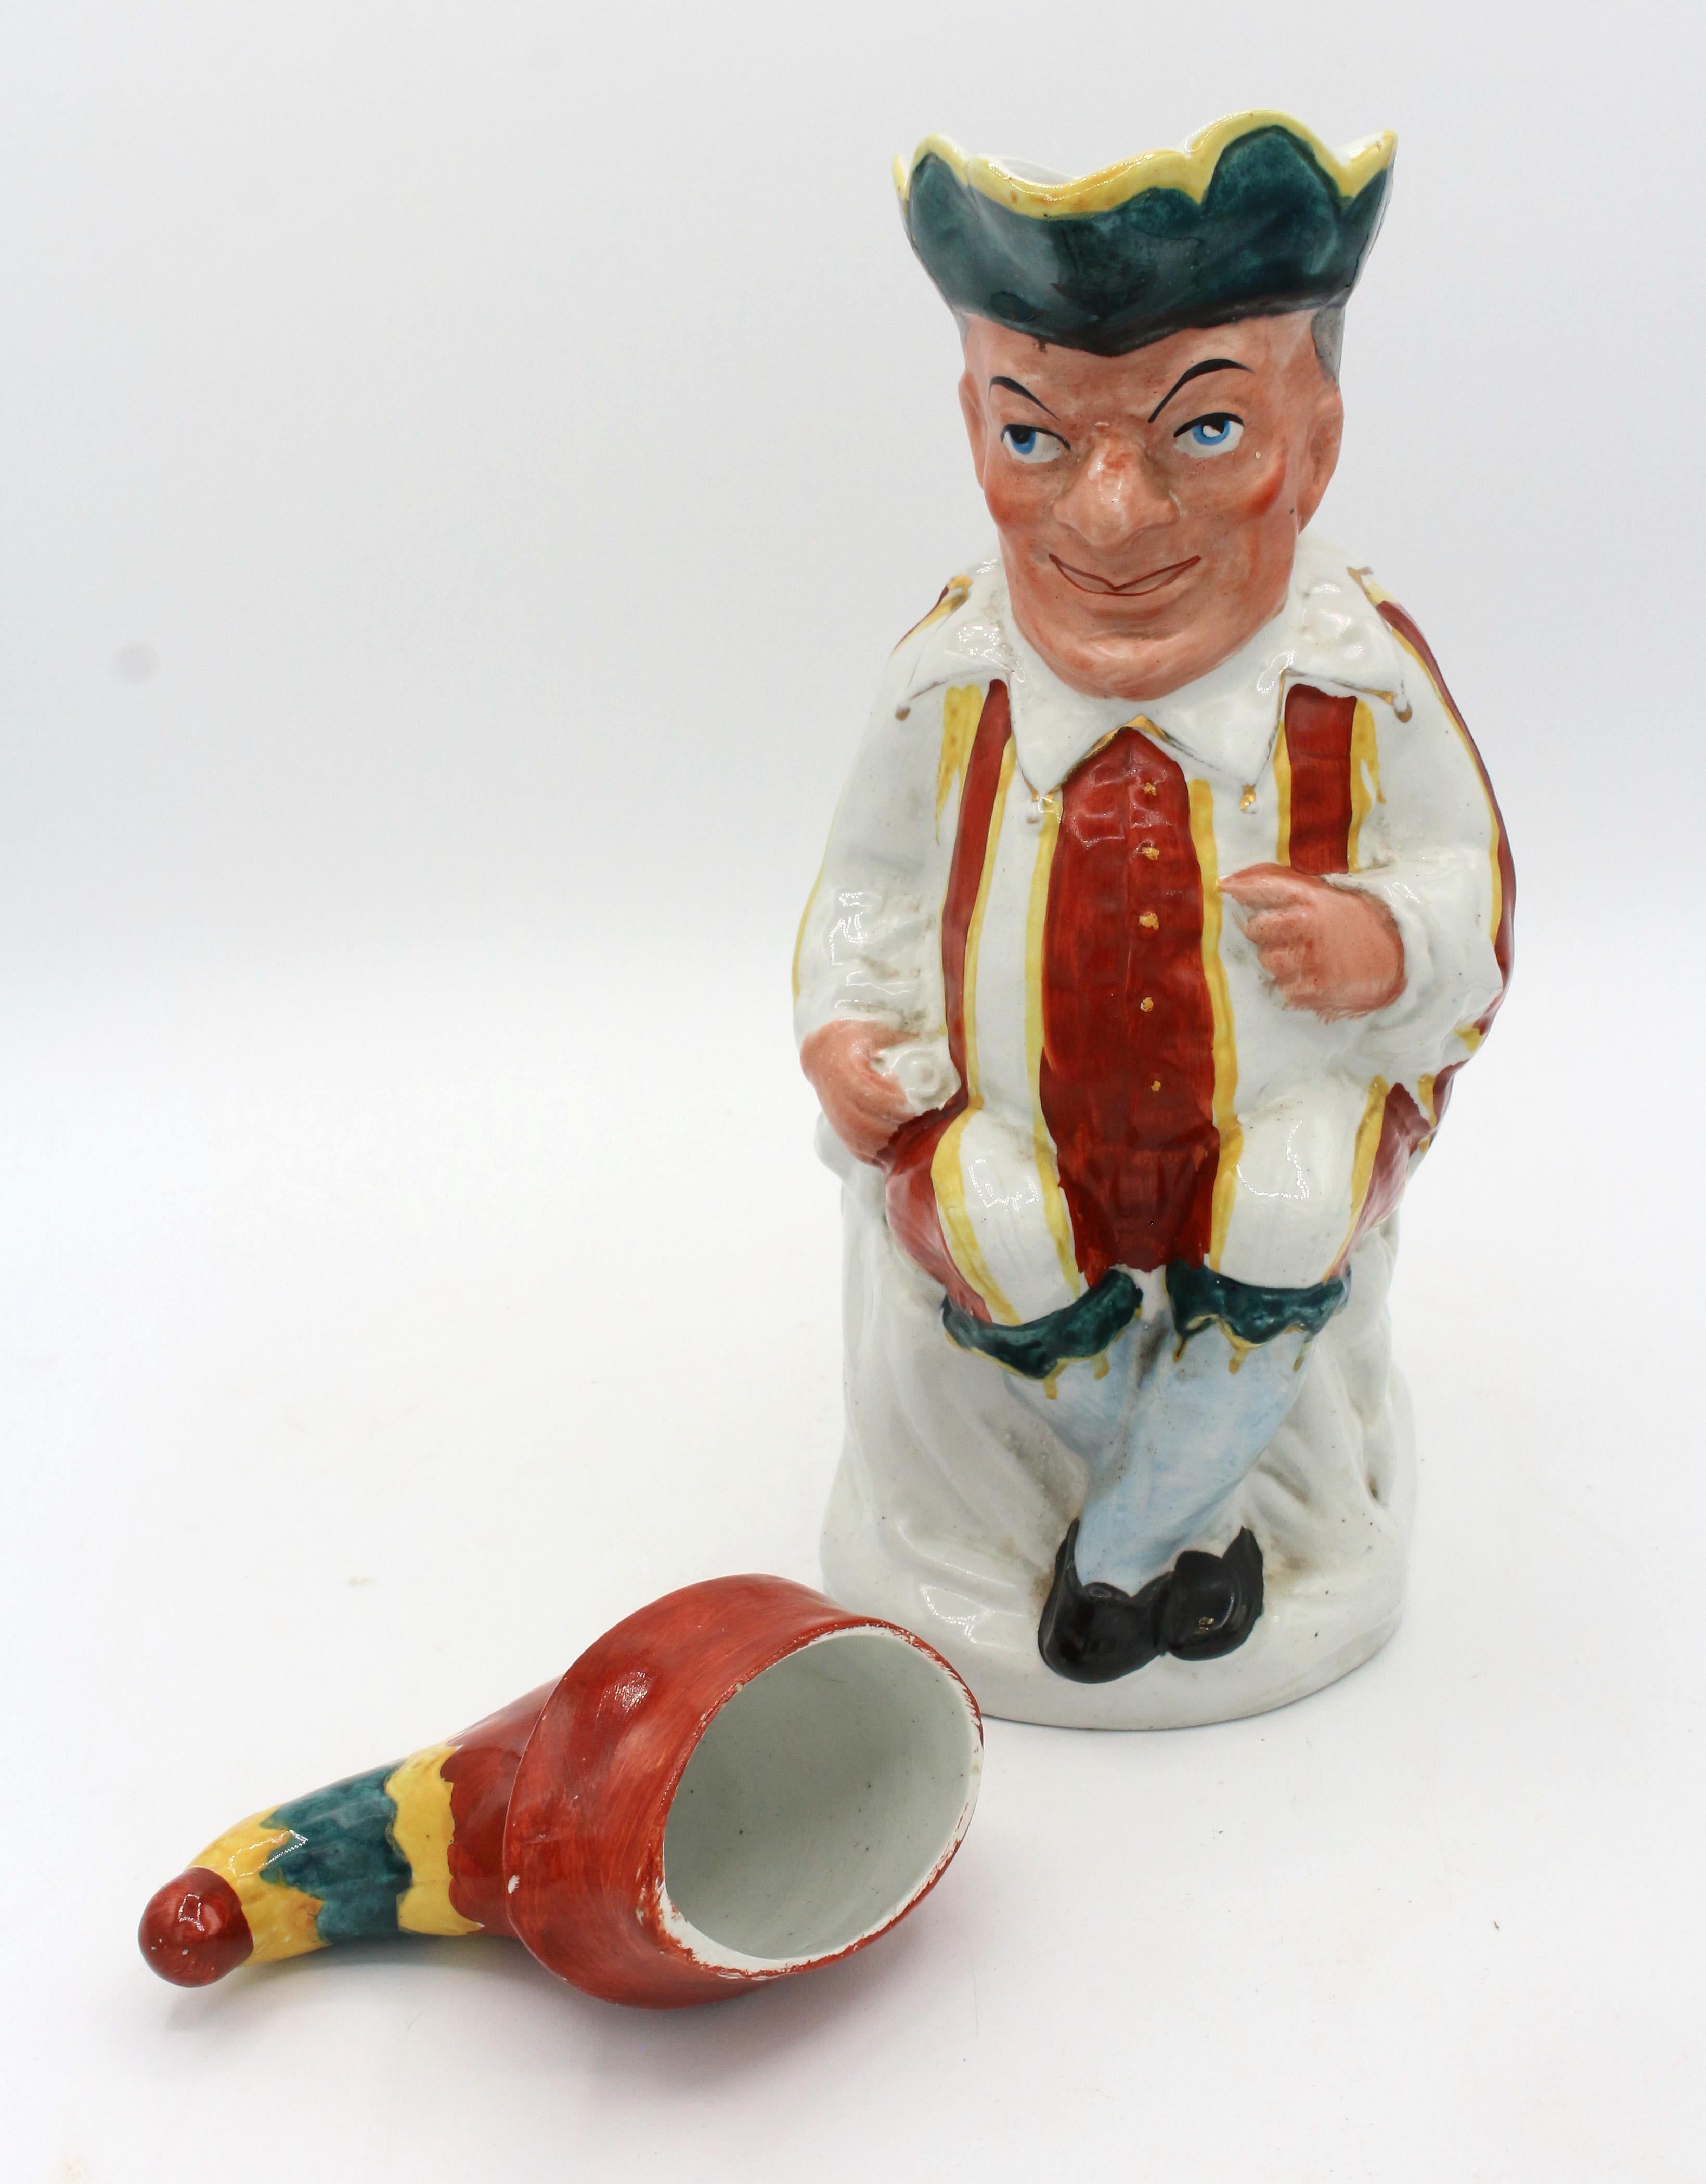 19th Century Hilarious Punch figure Toby Jug by William Machin, England, 1889-1910 For Sale